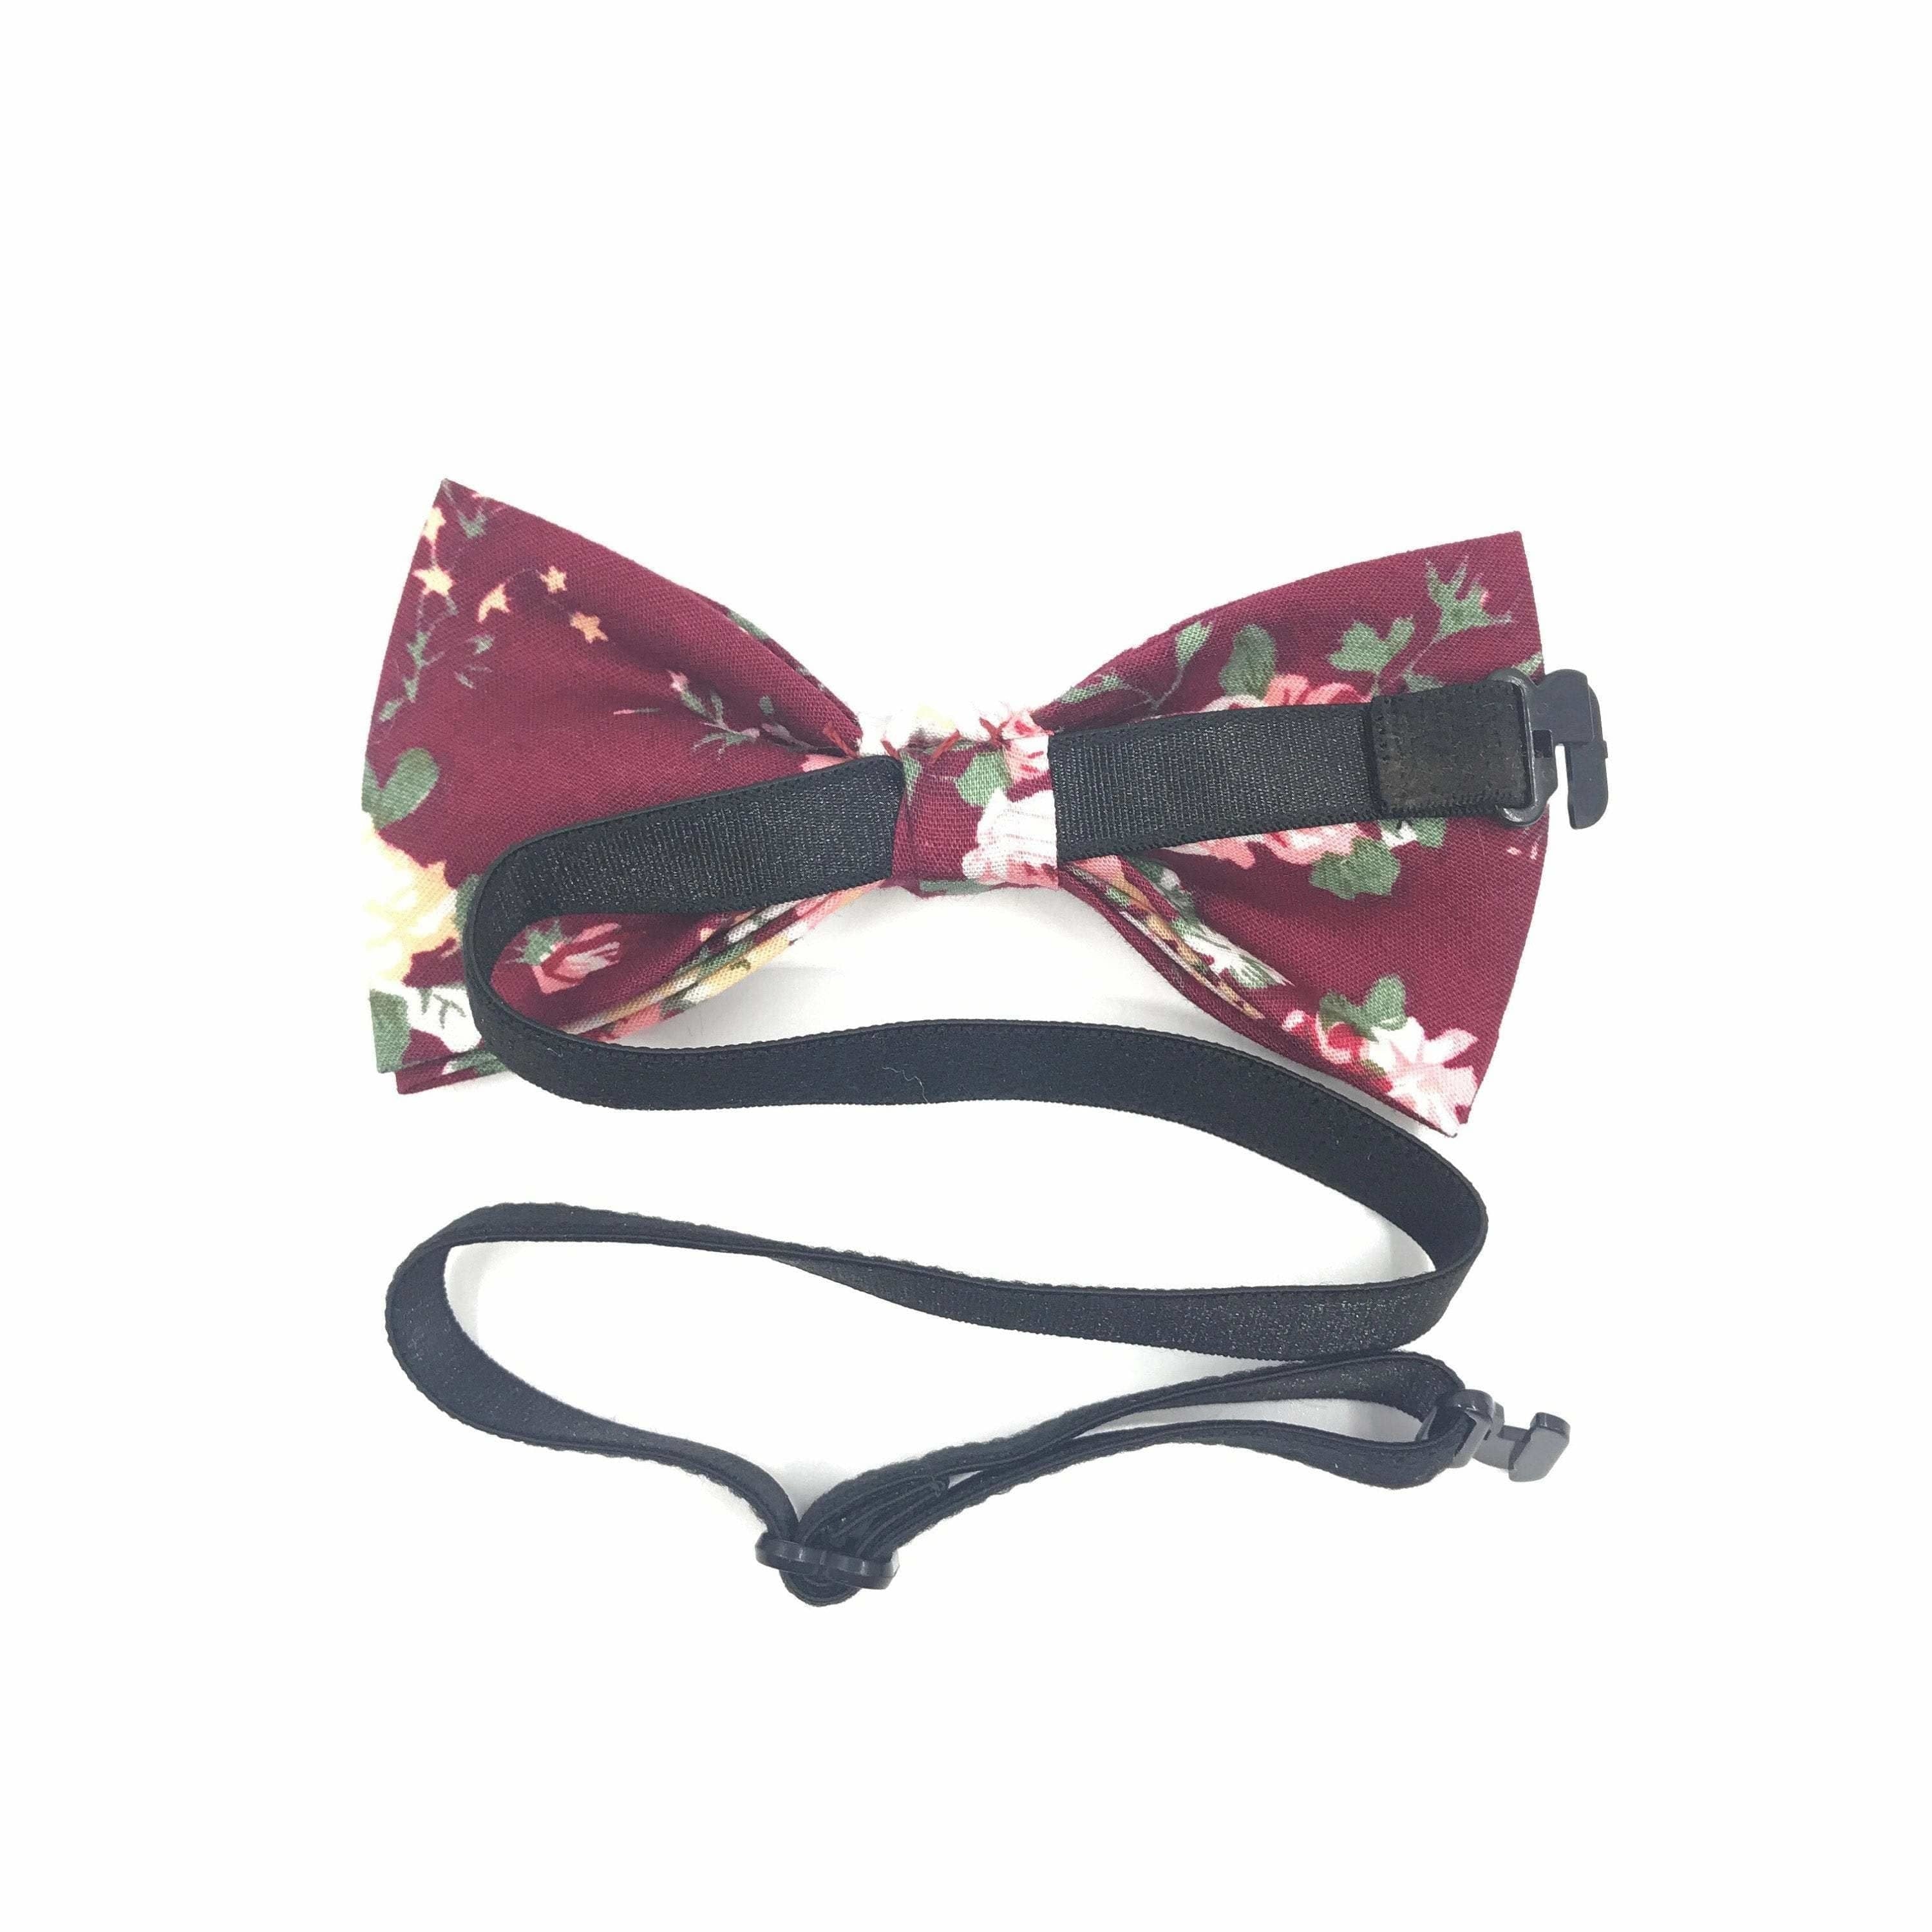 Kids Bow Tie Floral Pre-Tied Bow Tie WESLEY- MYTIESHOP-Floral Kid&#39;s bow tie - Wesley Strap is adjustablePre-Tied bowtieBow Tie 10.5 * 6CM Color: Burgundy Your little gentleman will look dapper in this burgundy floral bow tie. This pre-tied bow tie comes in a range of sizes to fit your child perfectly. The vibrant flowers against the dark background make this tie a stand-out piece. Add this bow tie to your child&#39;s wardrobe for a special occasions or even just to add a touch of refinement to their